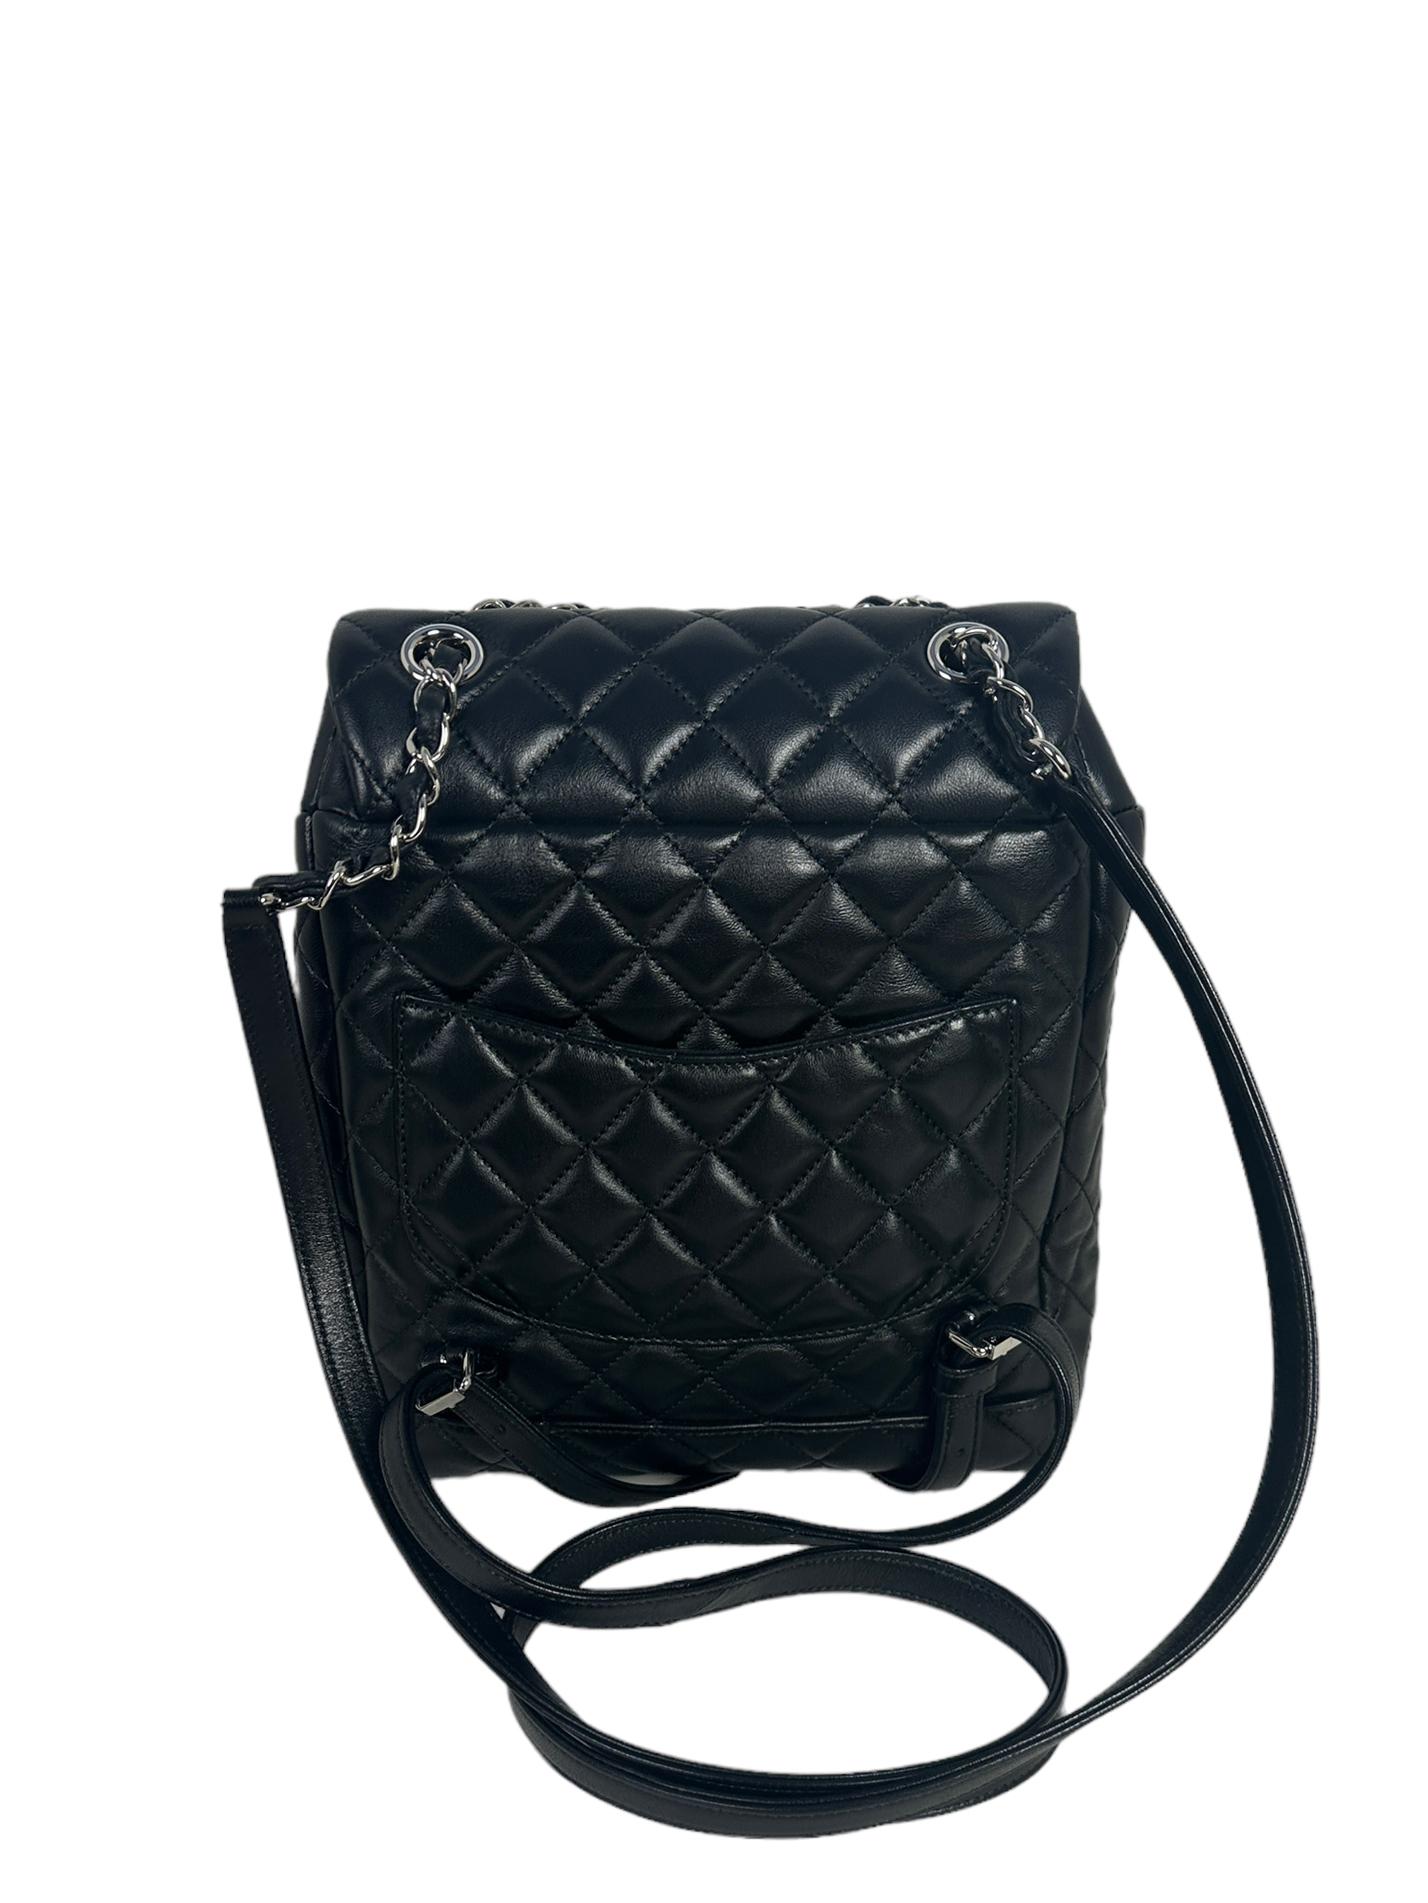 Chanel Black Lambskin Quilted Urban Spirit Backpack Bag

Made In: Italy
Year of Production: 2016
Color: Black
Hardware: Silvertone
Materials: Lambskin leather, metal
Lining: Black grosgrain
Closure/Opening: Flap top with CC twist-lock
Exterior